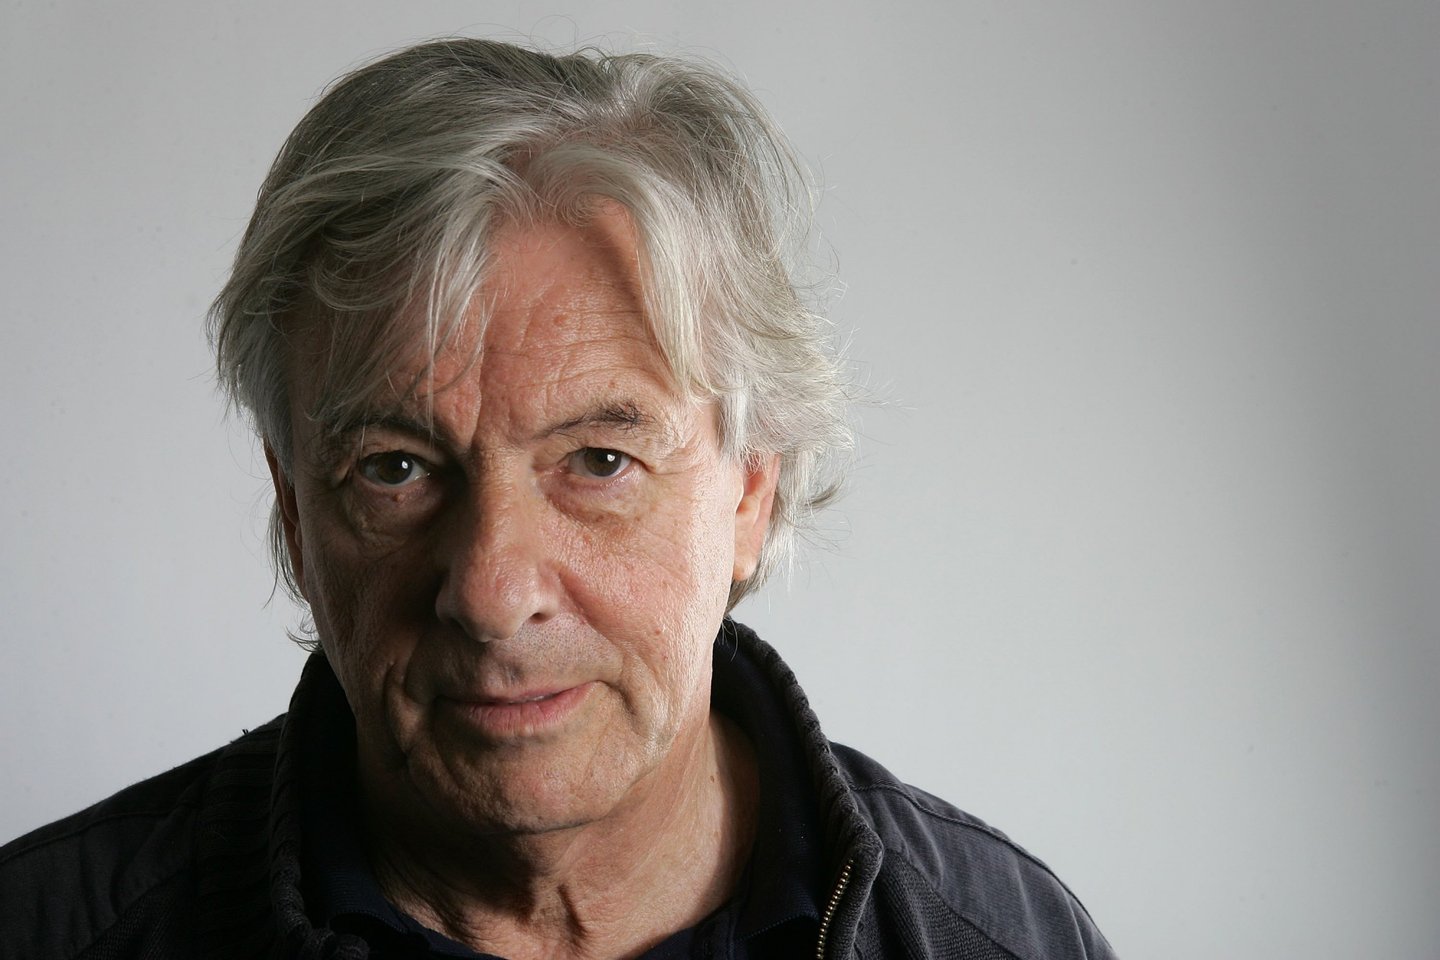 TORONTO - SEPTEMBER 15: Director Paul Verhoeven of the film "Black Book" poses for portraits in the Chanel Celebrity Suite at the Four Season hotel during the Toronto International Film Festival on September 15, 2006 in Toronto, Canada. (Photo by Carlo Allegri/Getty Images)